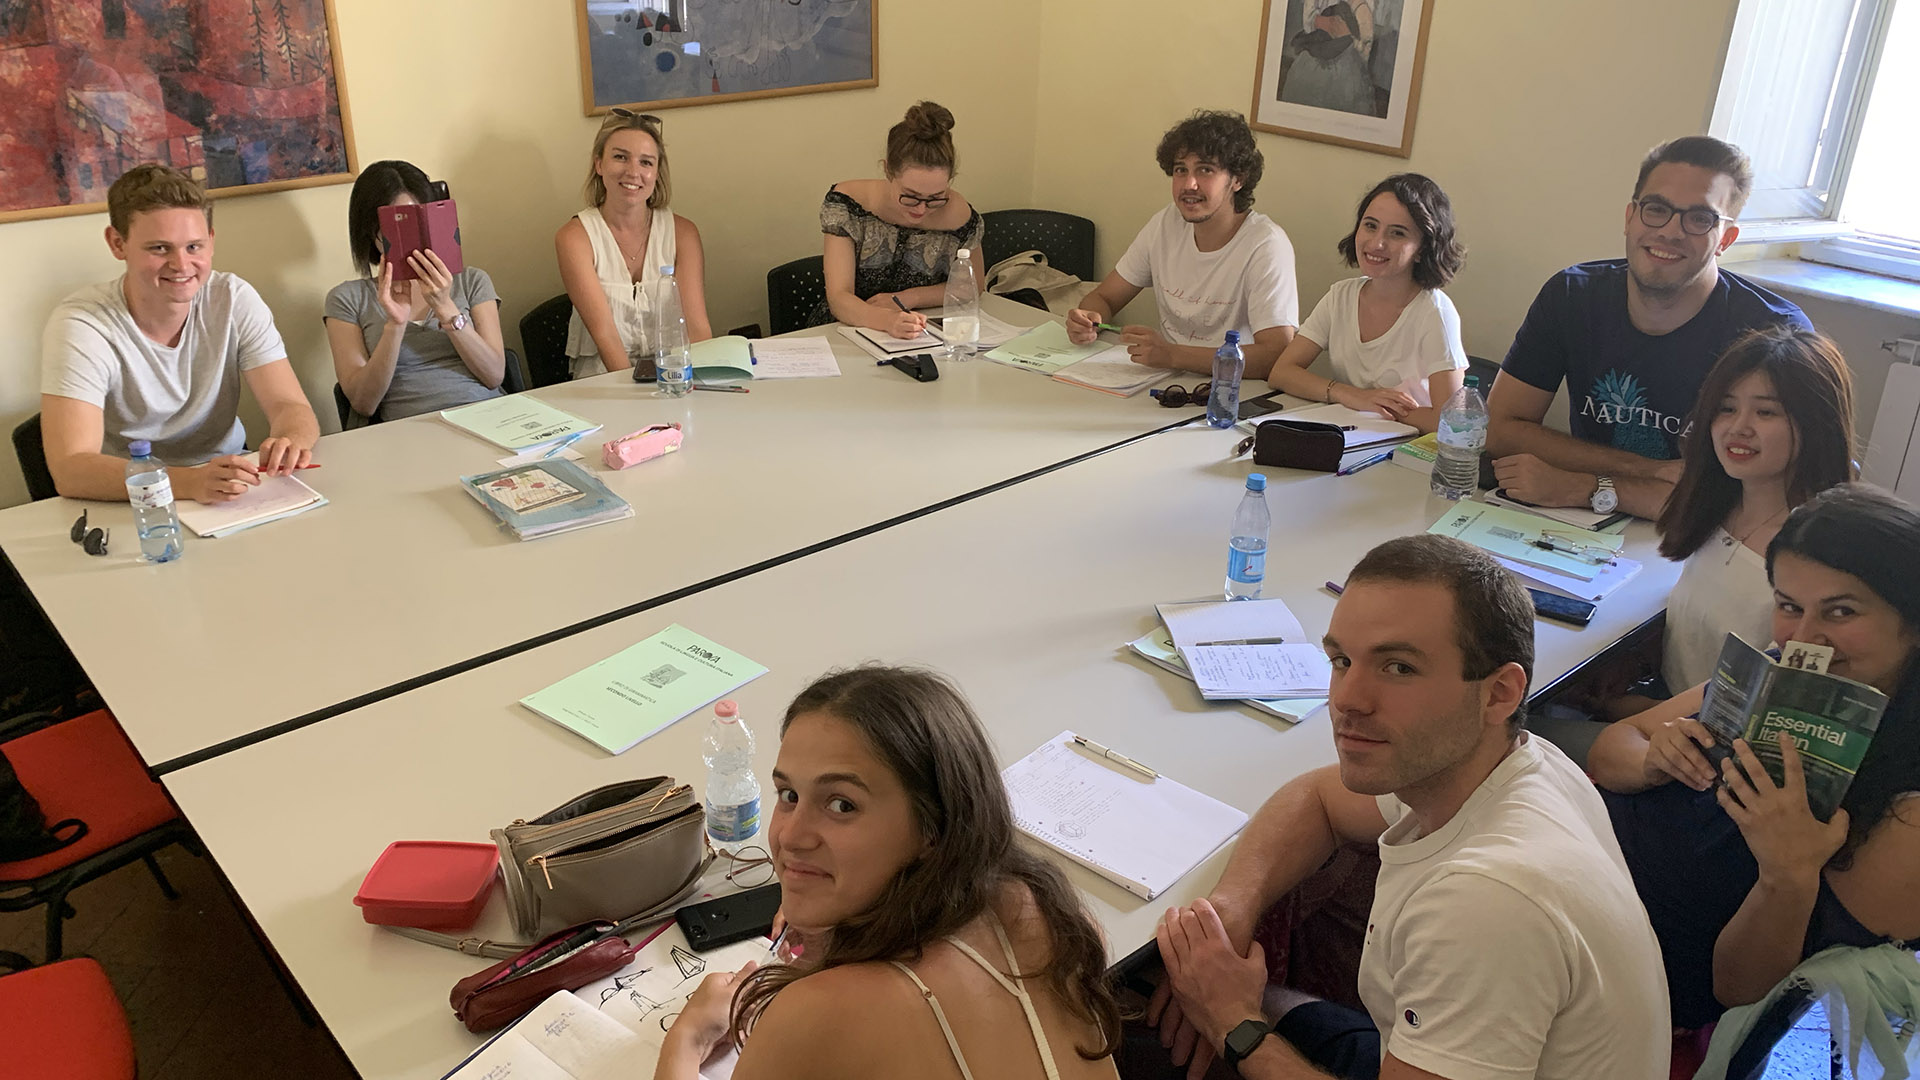 Group Italian language course in Florence